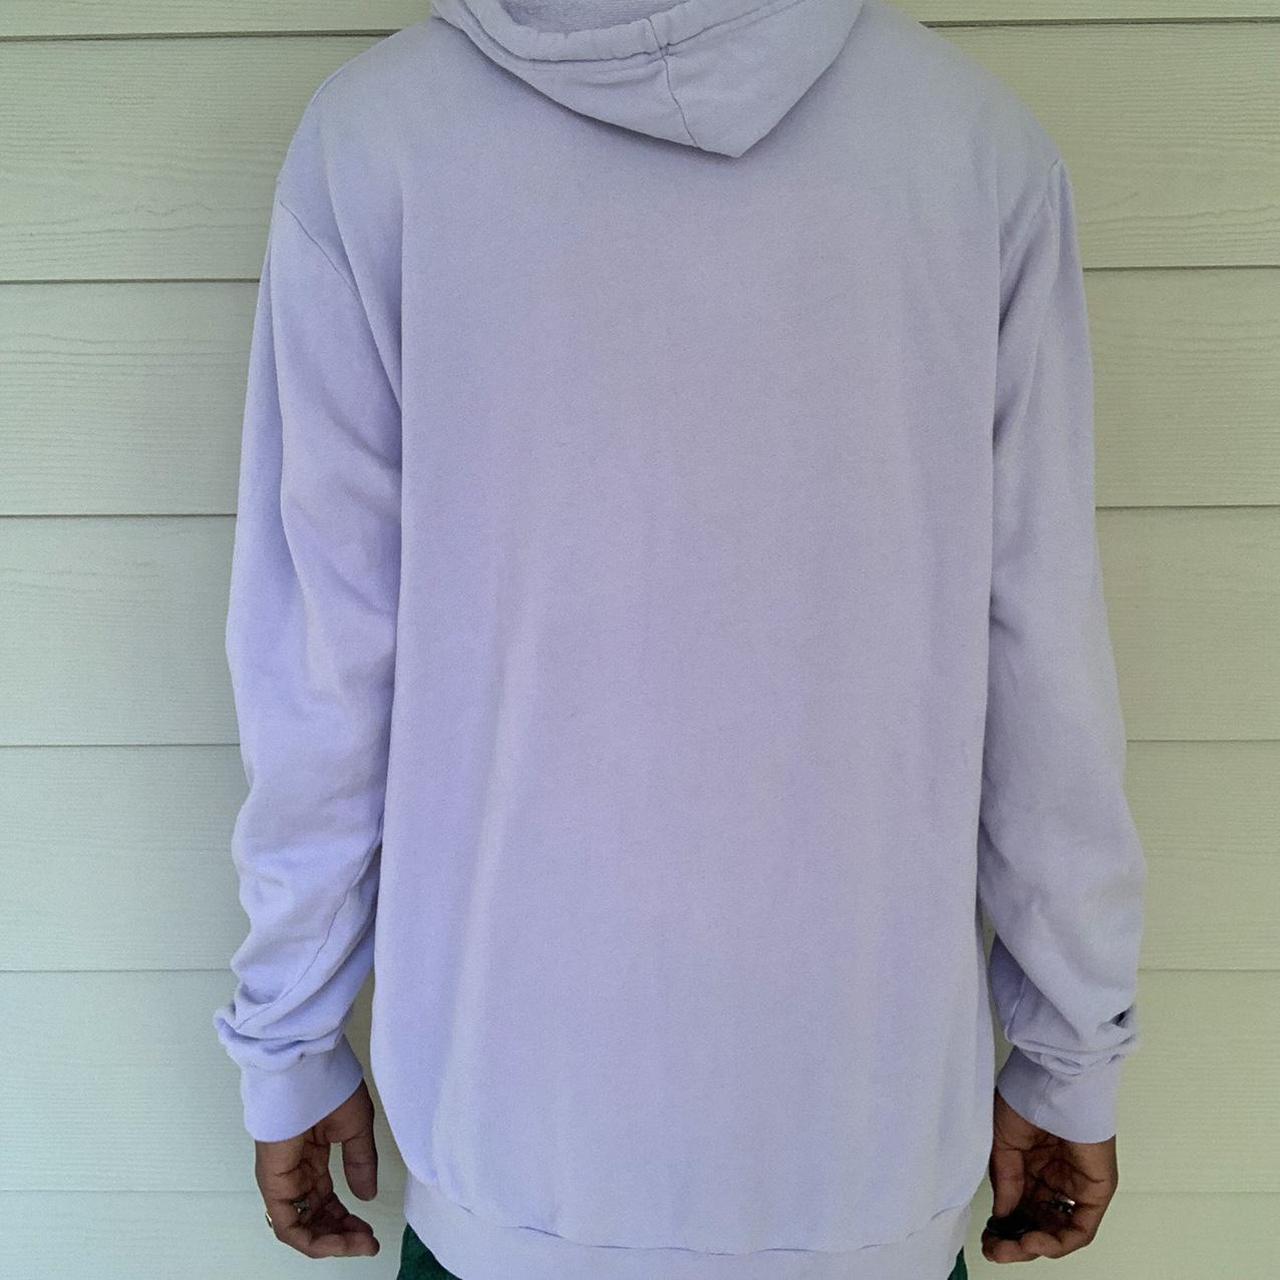 Product Image 2 - Lilac Grizzly Grip Tape Hoodie

Model